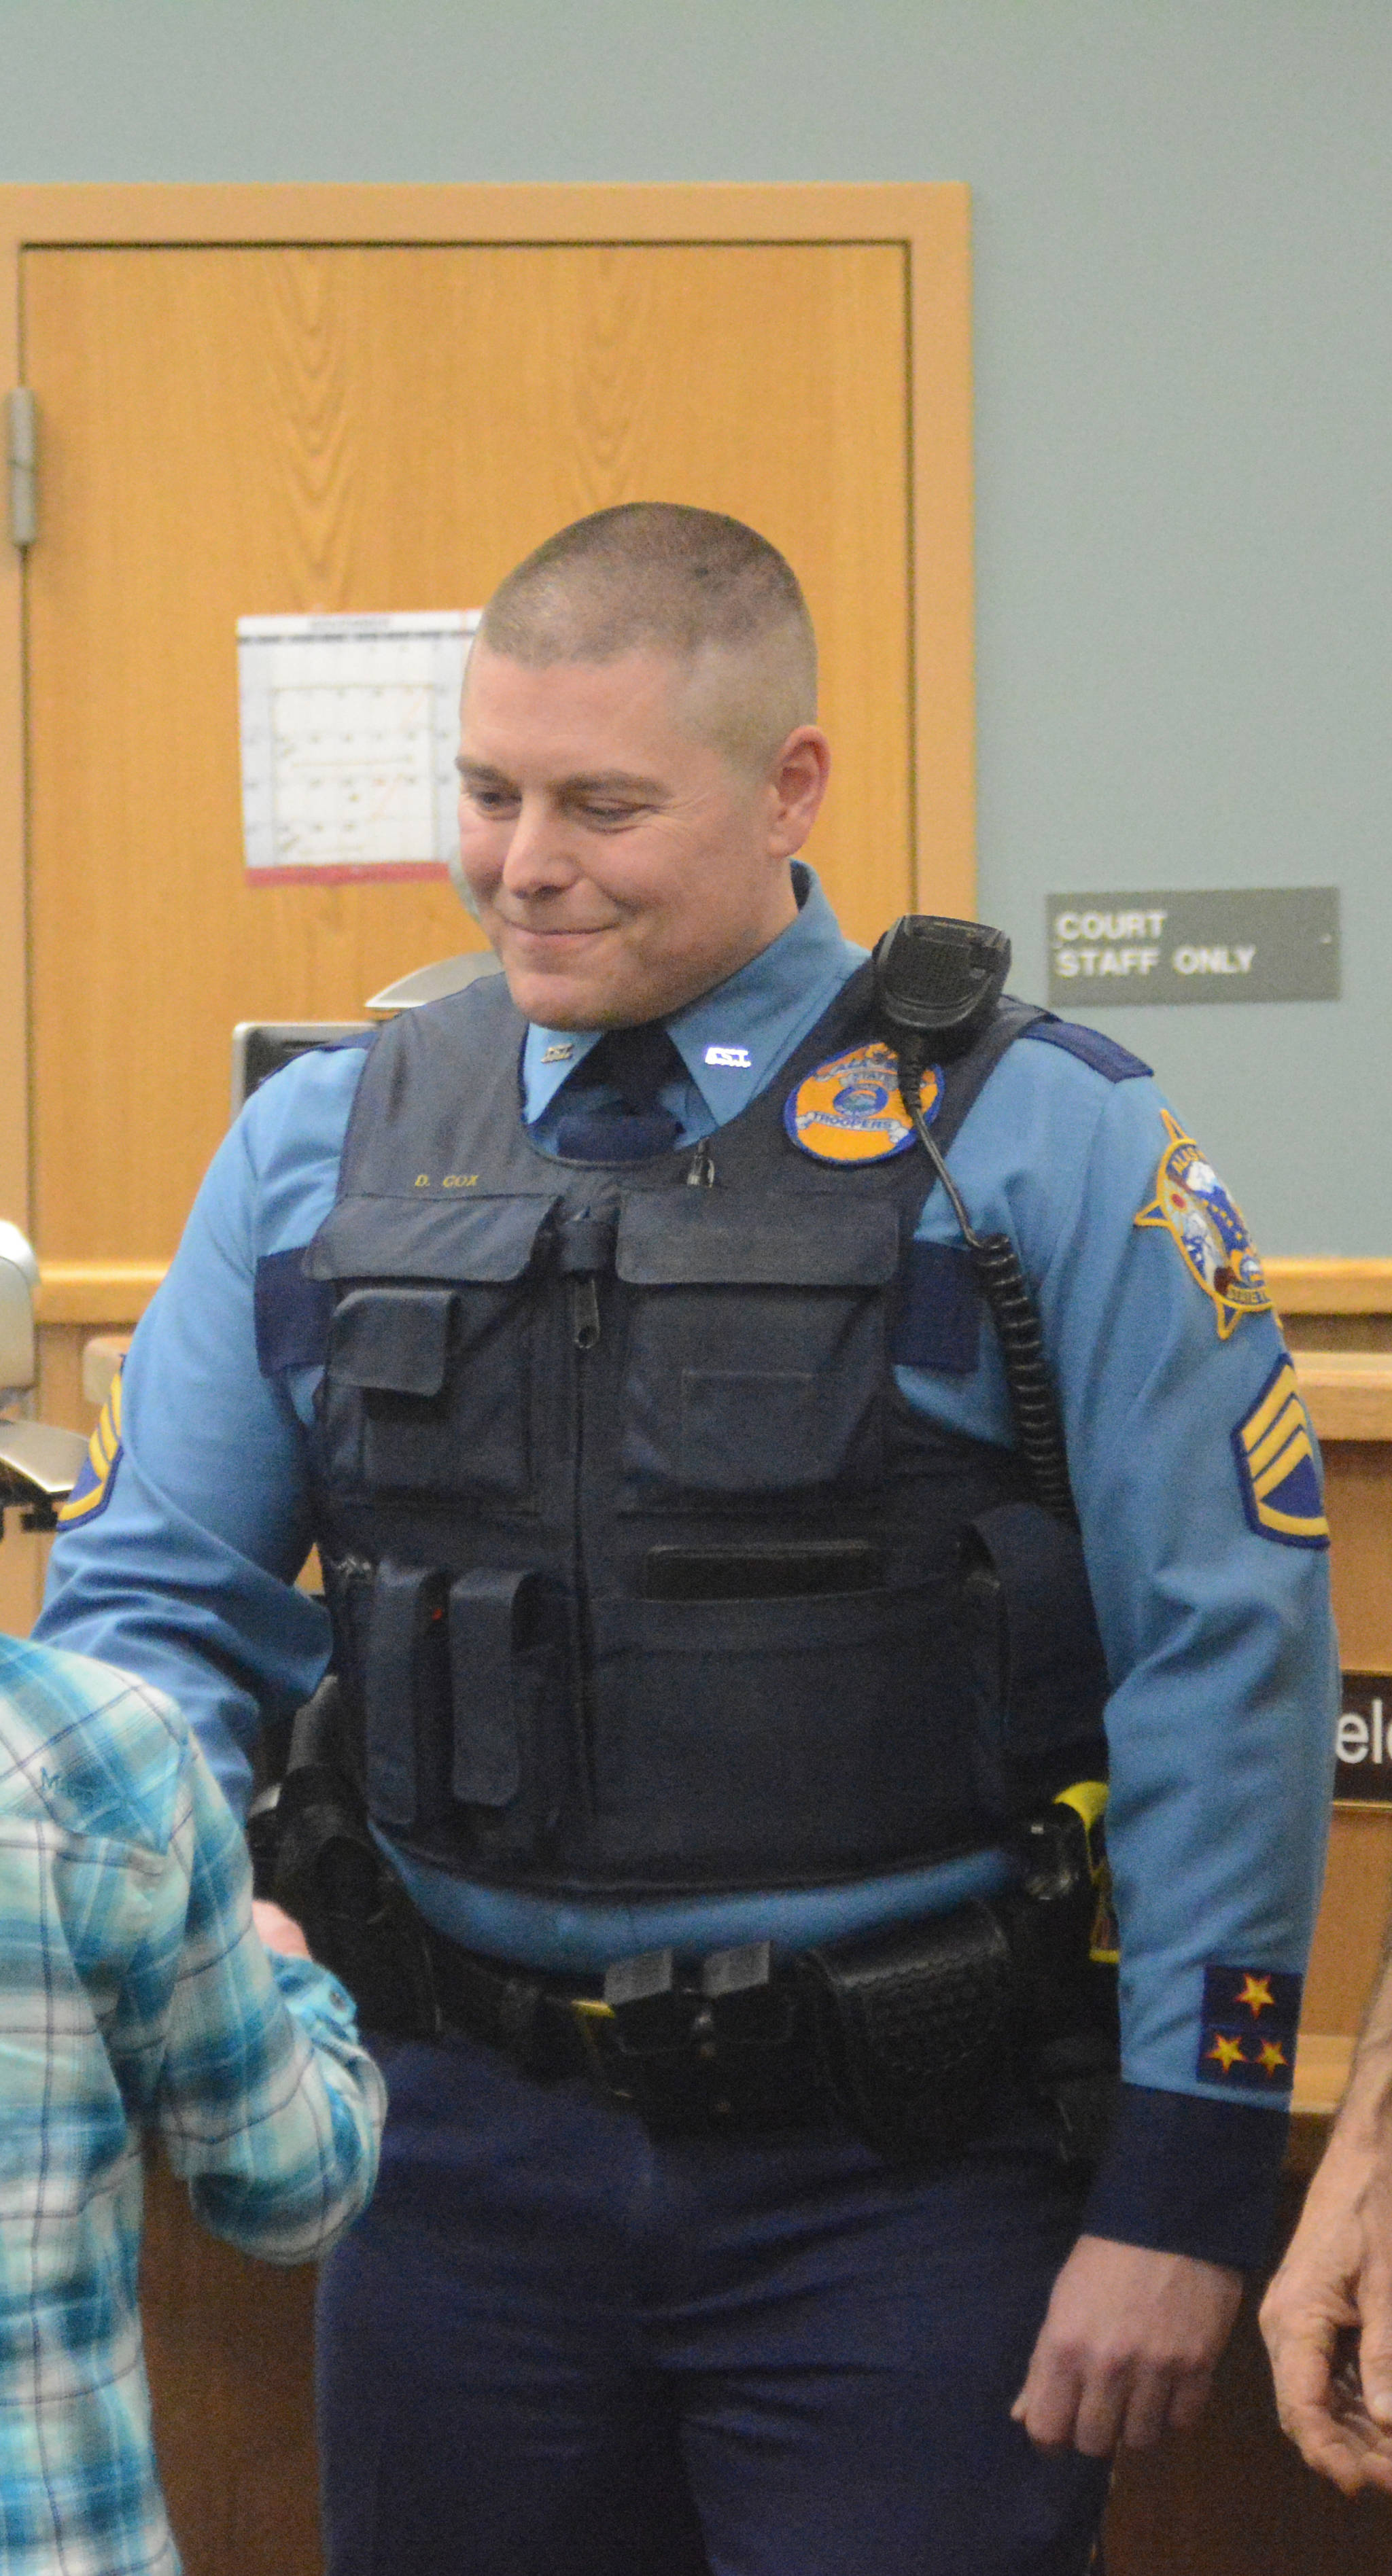 Sgt. Daniel Cox congratulates a Kenai Peninsula Youth Court attorney at swearing-in ceremonies at the Homer Courthouse in December 2016. (Photo by Michael Armstrong, Homer News)